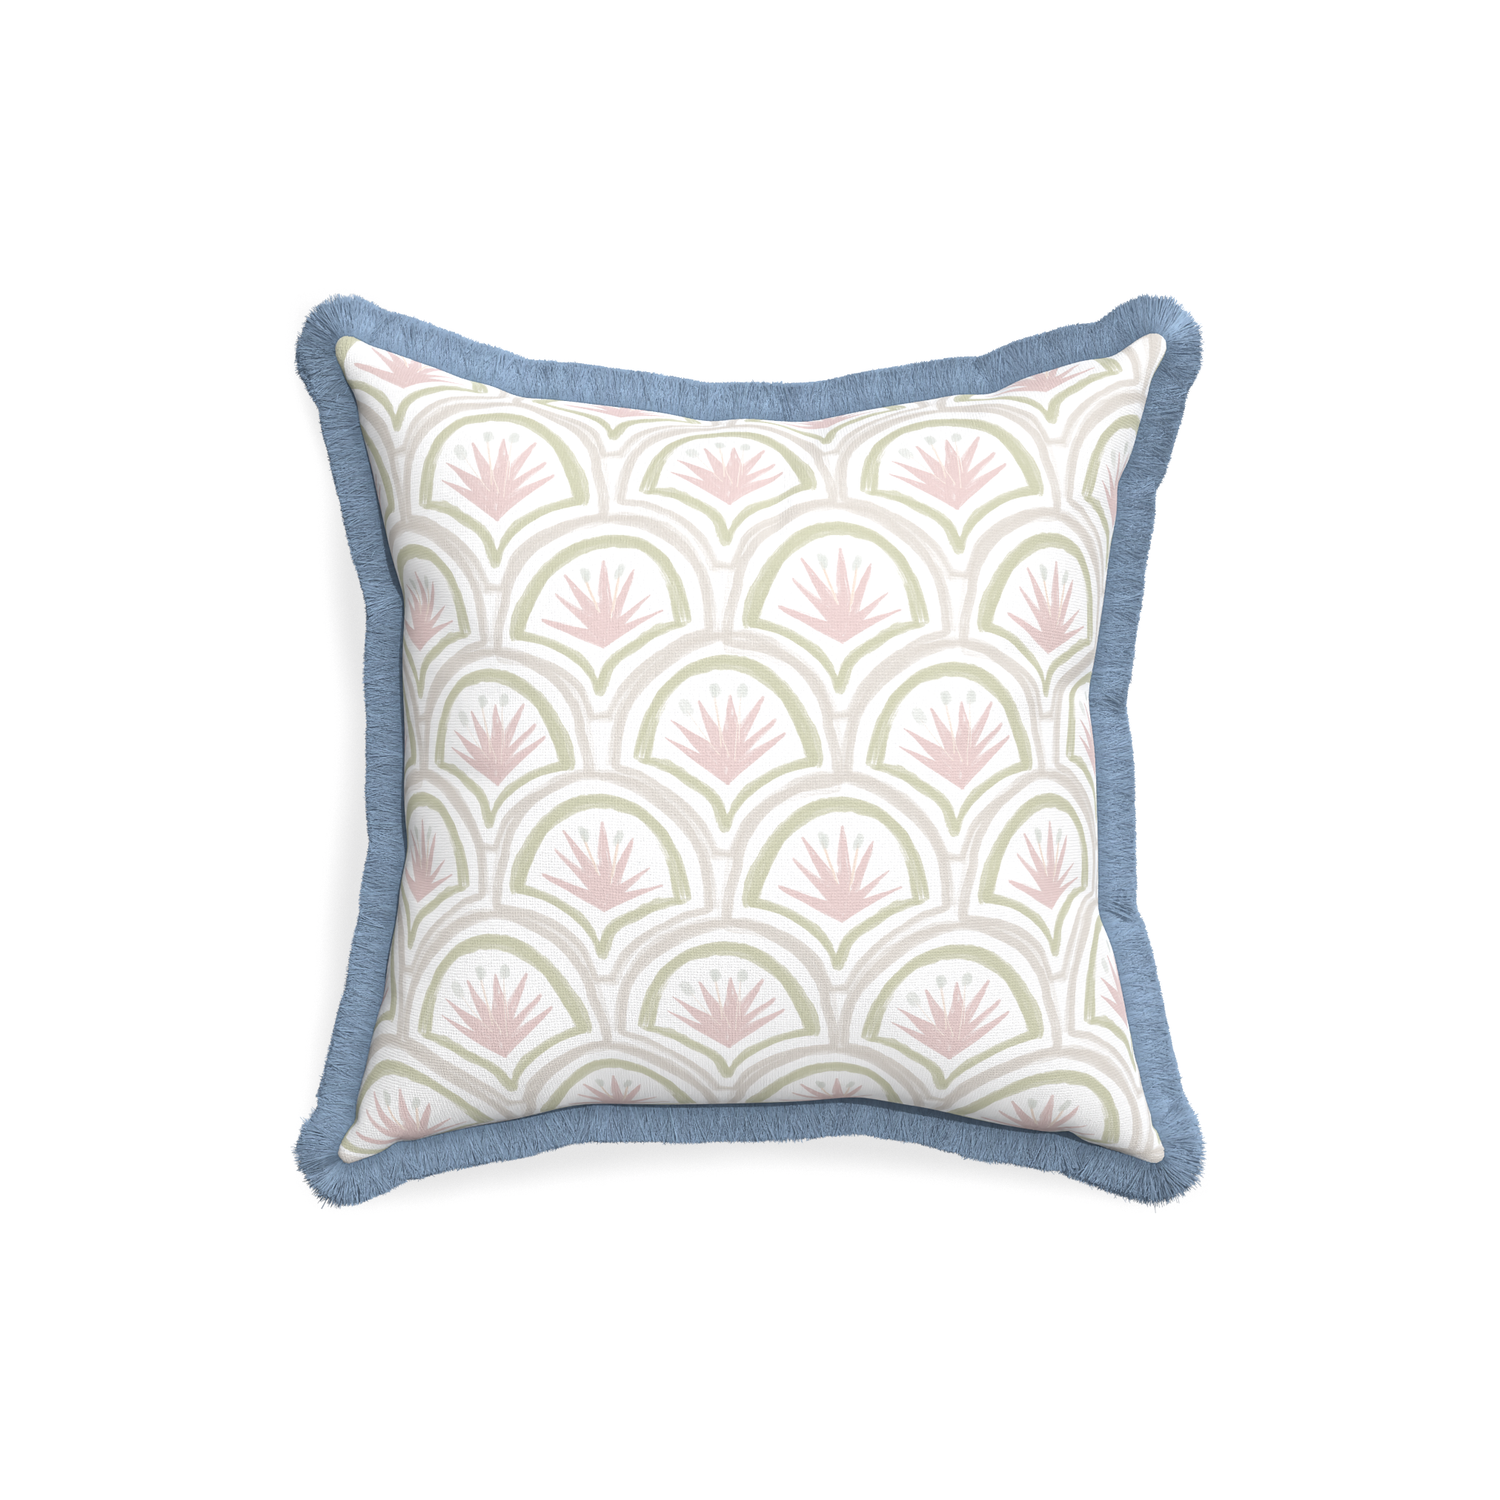 18-square thatcher rose custom pillow with sky fringe on white background